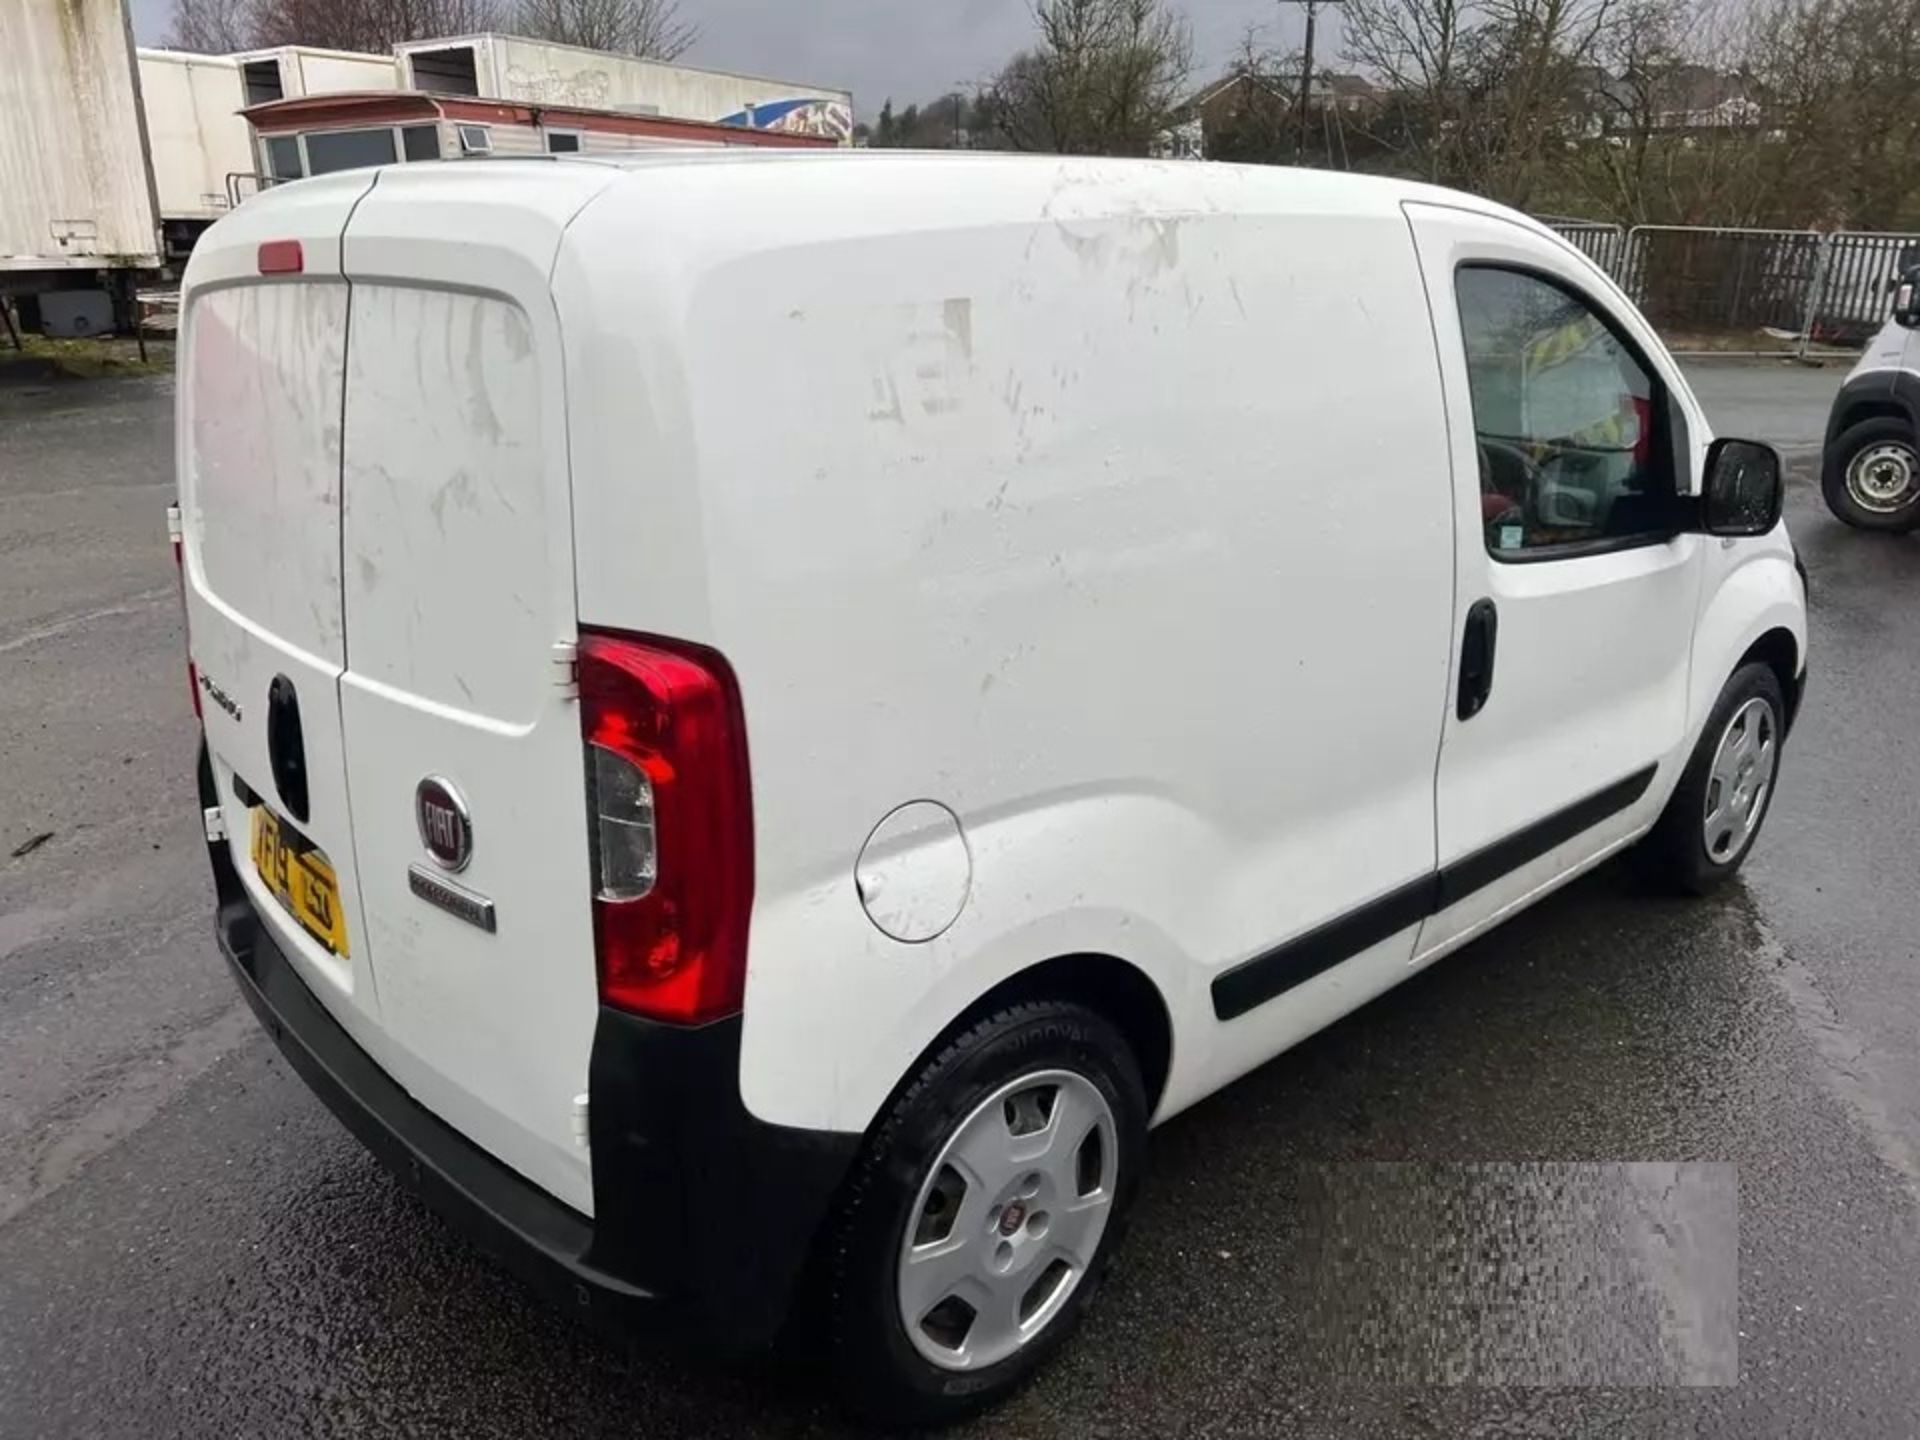 FIAT FIORINO SX 1.3 HDI VAN 2019 - LOADED WITH FEATURES, SOLD FOR SPARES OR REPAIRS - Image 3 of 12